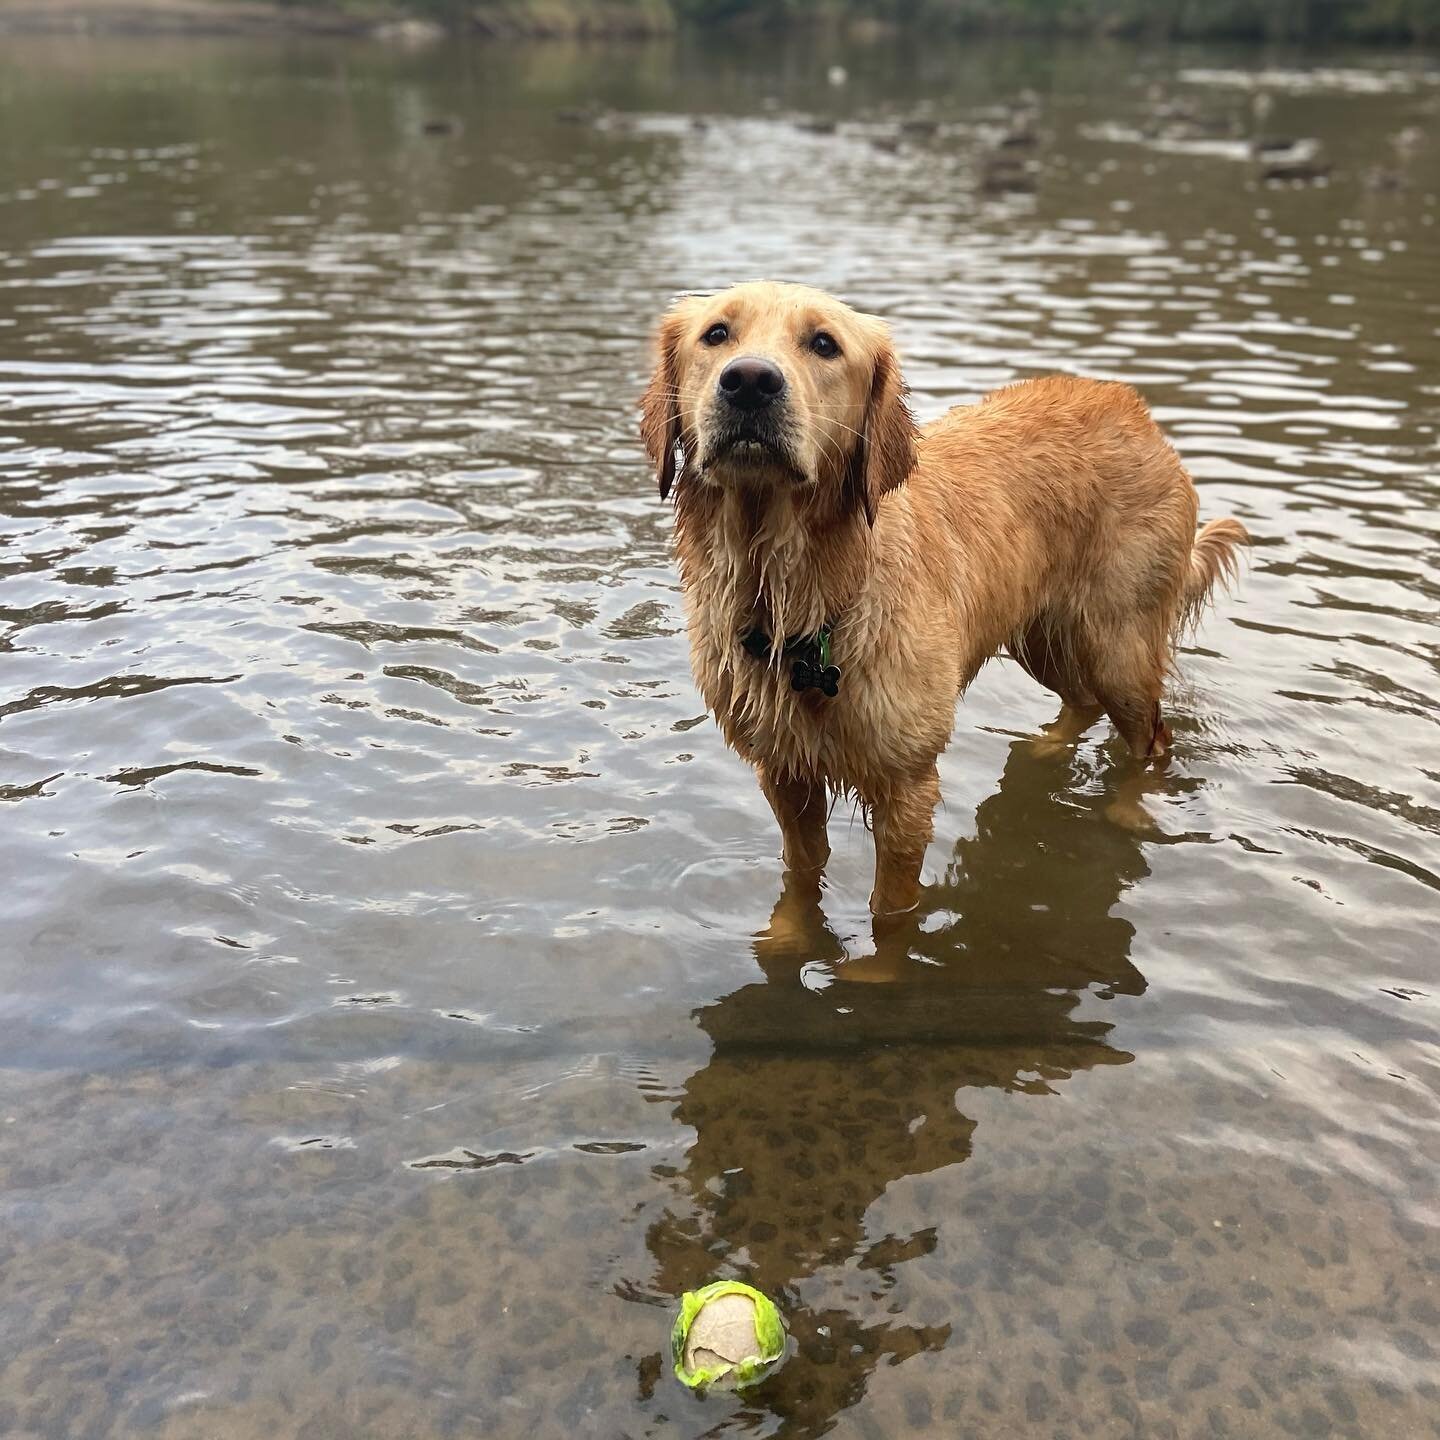 Ducks, balls &amp; water (not in that order) are some of Winnies favourite things.